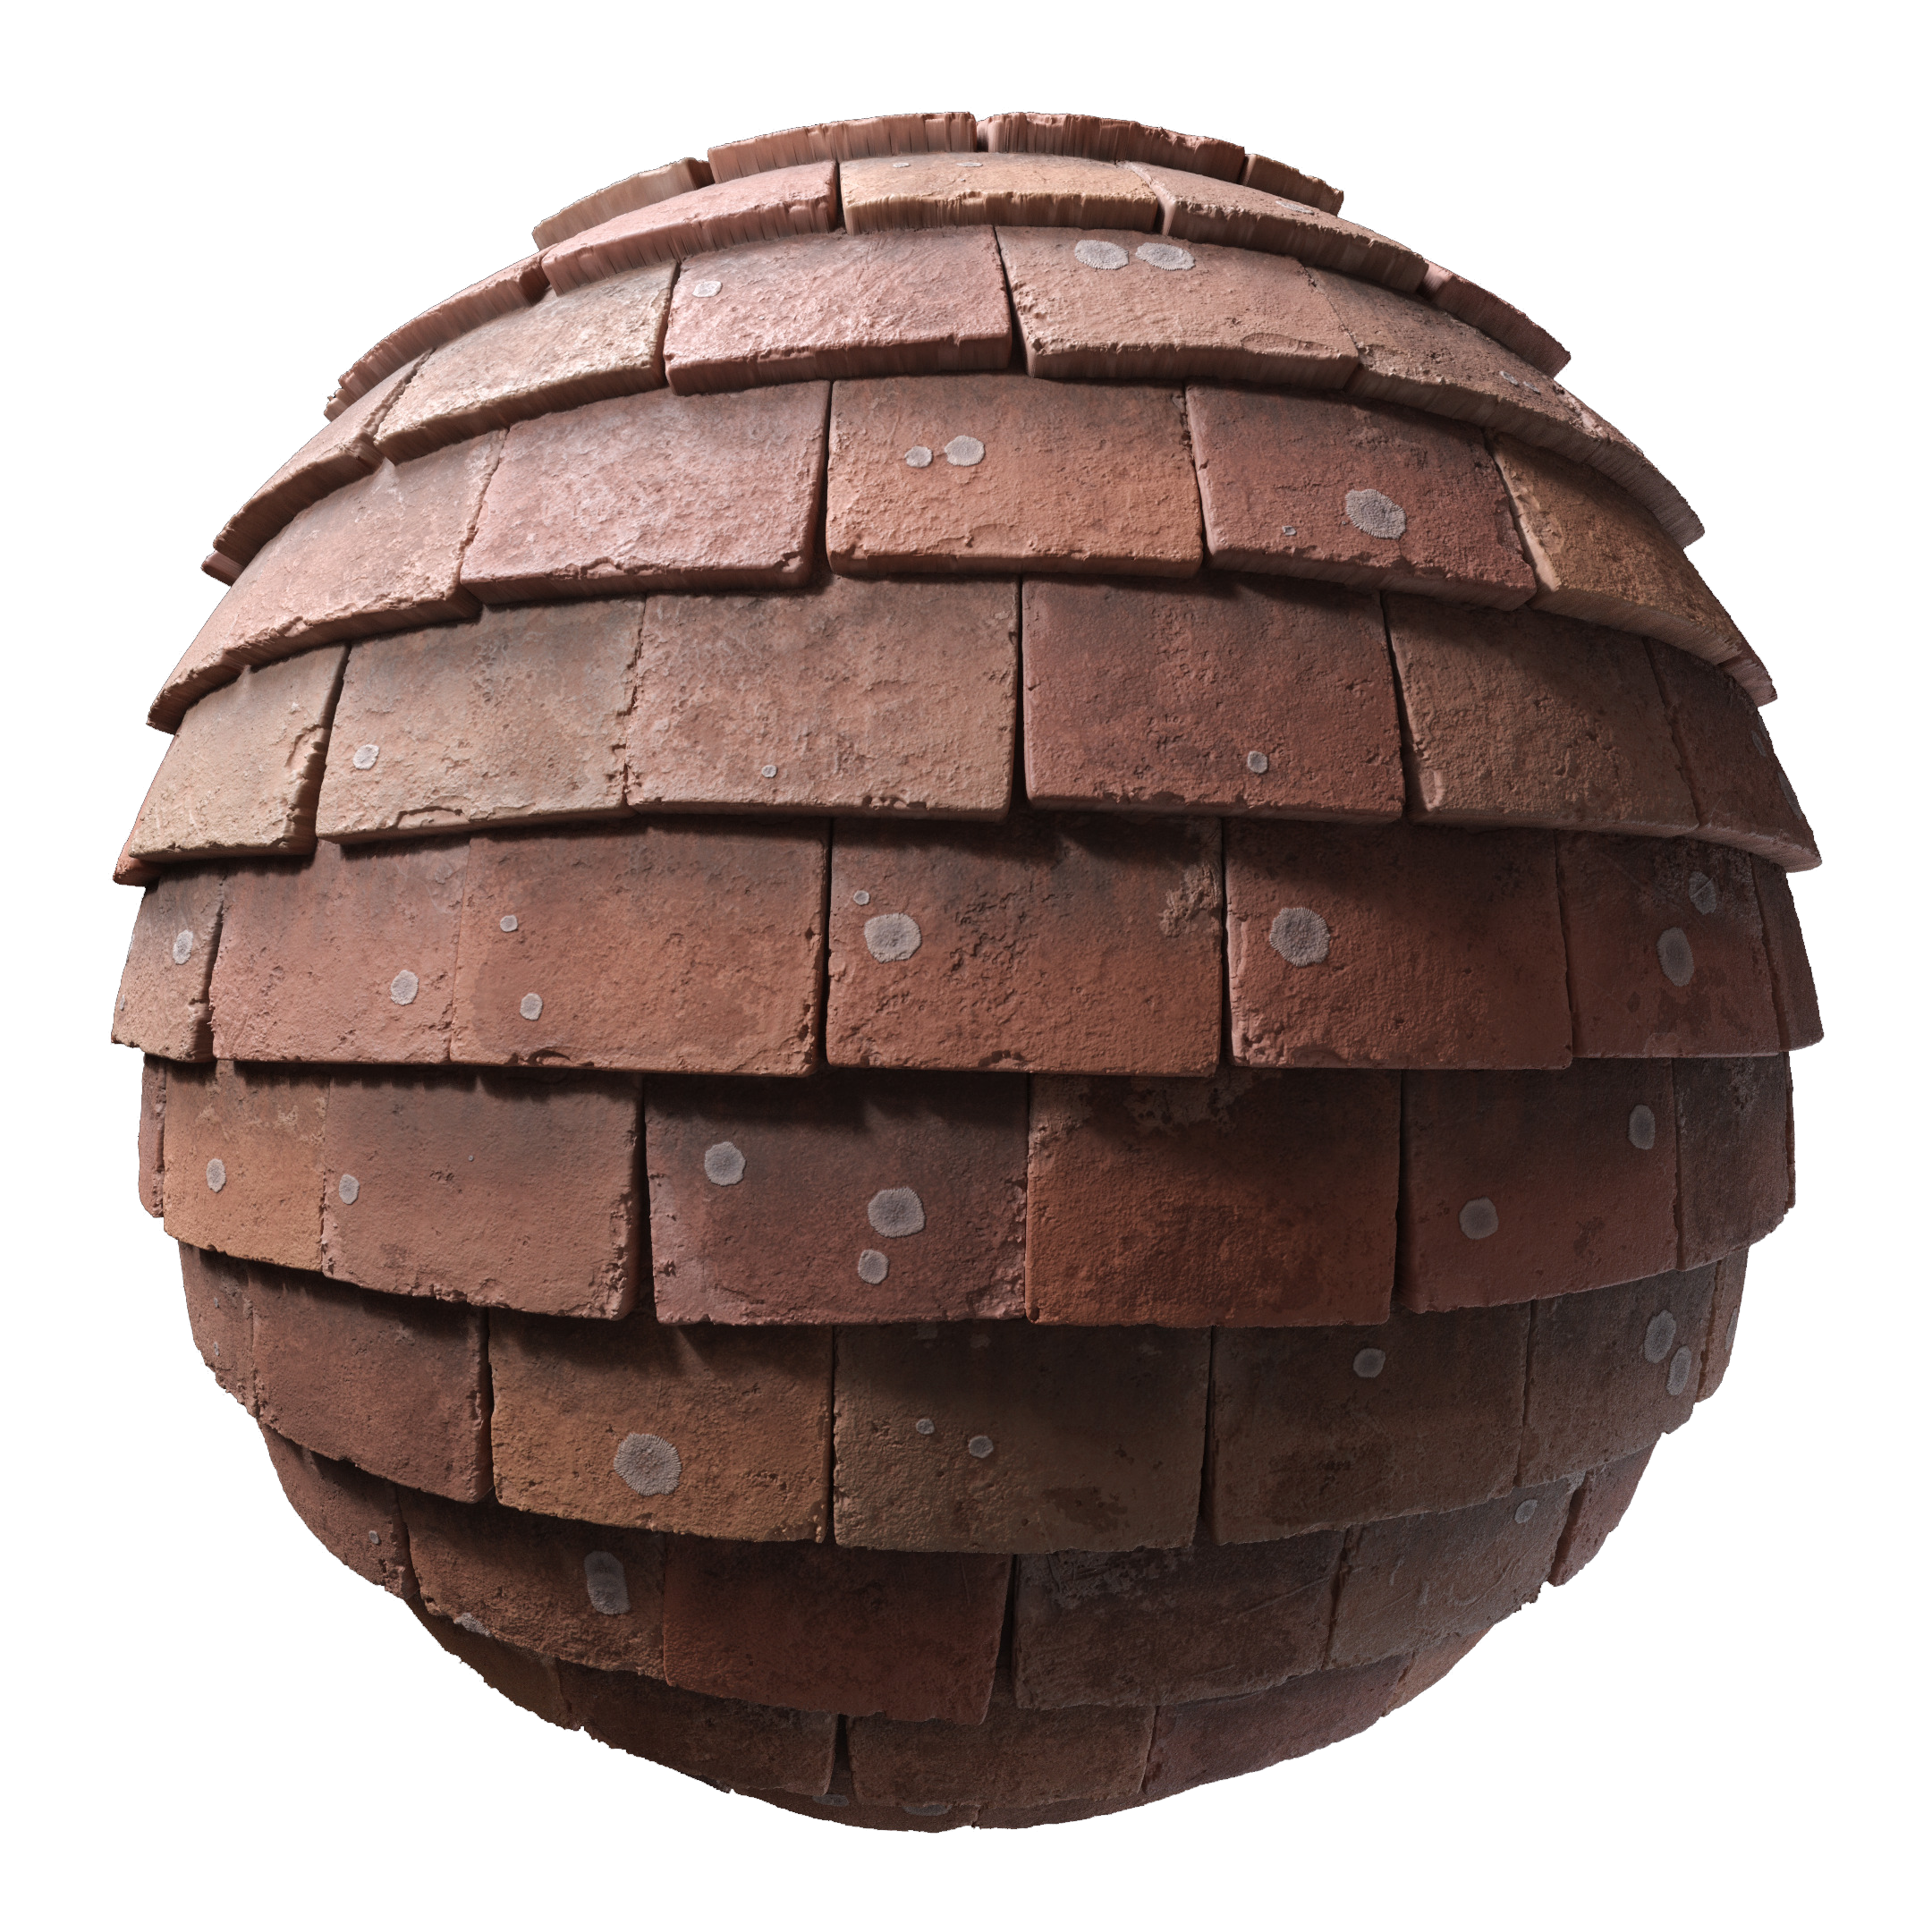 TexturesCom_Old_Square_Rooftiles_2_header4 copy.png